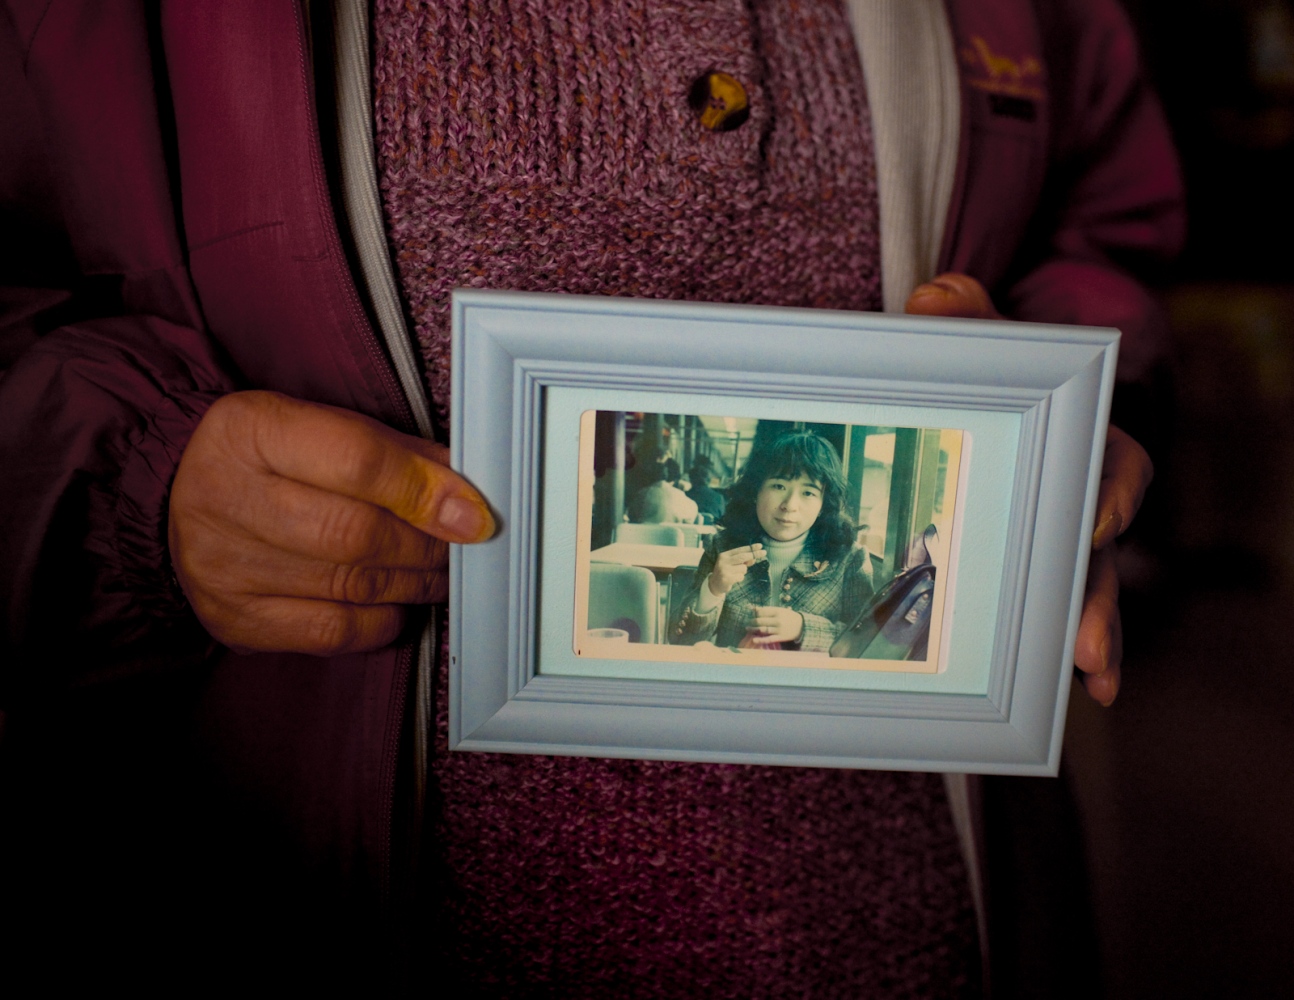  Tokiko Kitazaki, an evacuee from Tomioka-machi, Fukushima. A mushroom and rice farmer a good portion of her life and mother of two, holds an old photograph of herself when she was 25 years old. "Life is different now, things will never be the same," she says. Tomioka evacuee houses, Koriyama, Japan. Feb. 2014 